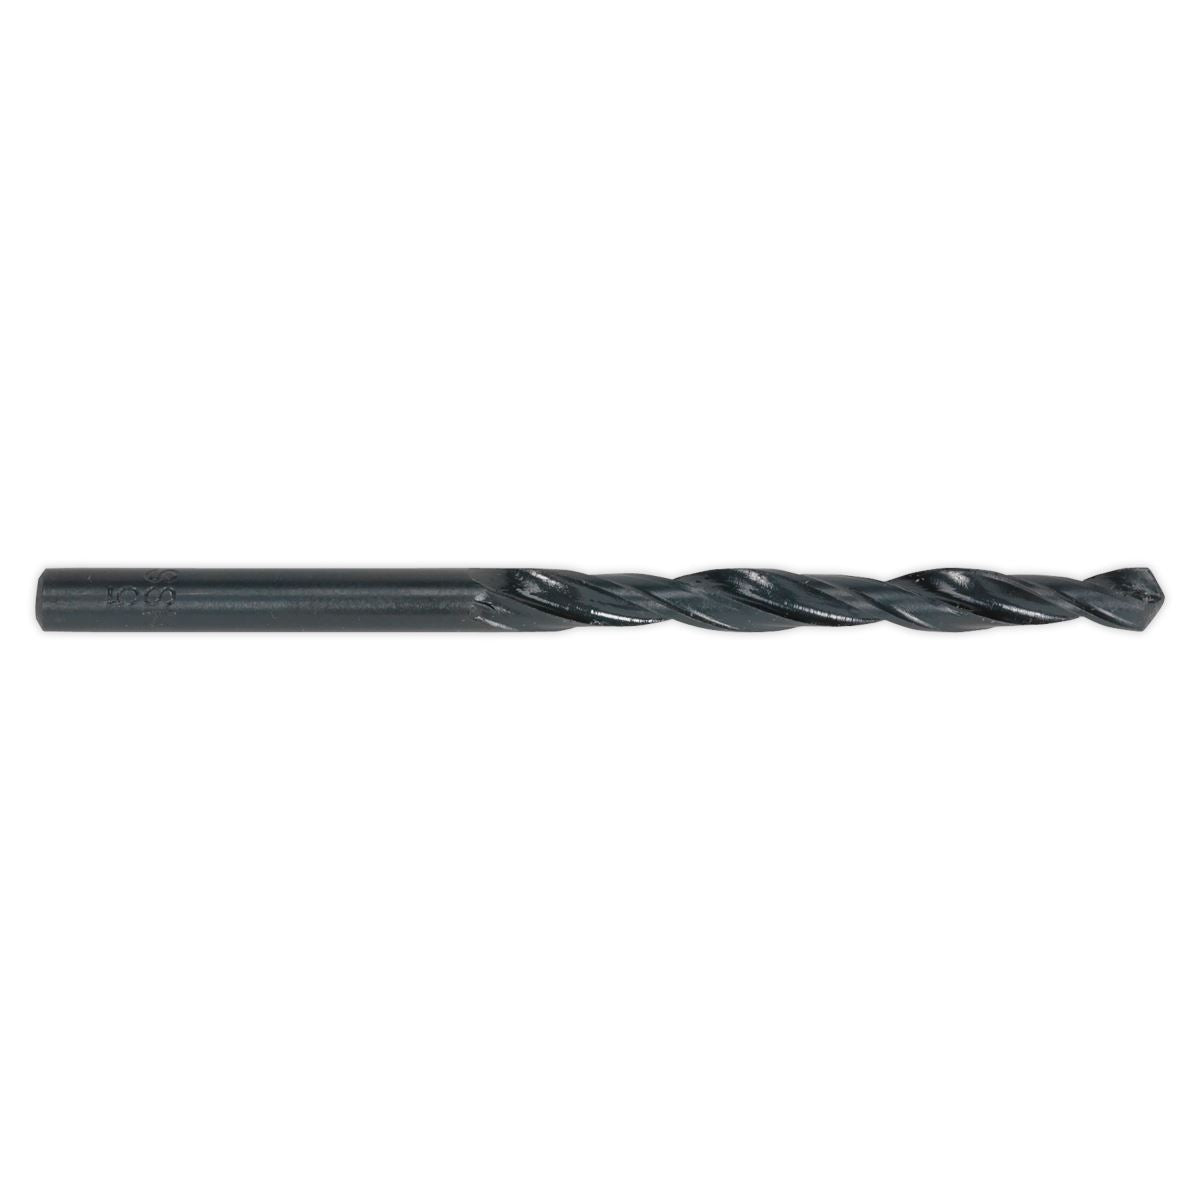 Sealey HSS Roll Forged Drill Bit Ø3/16" Pack of 10